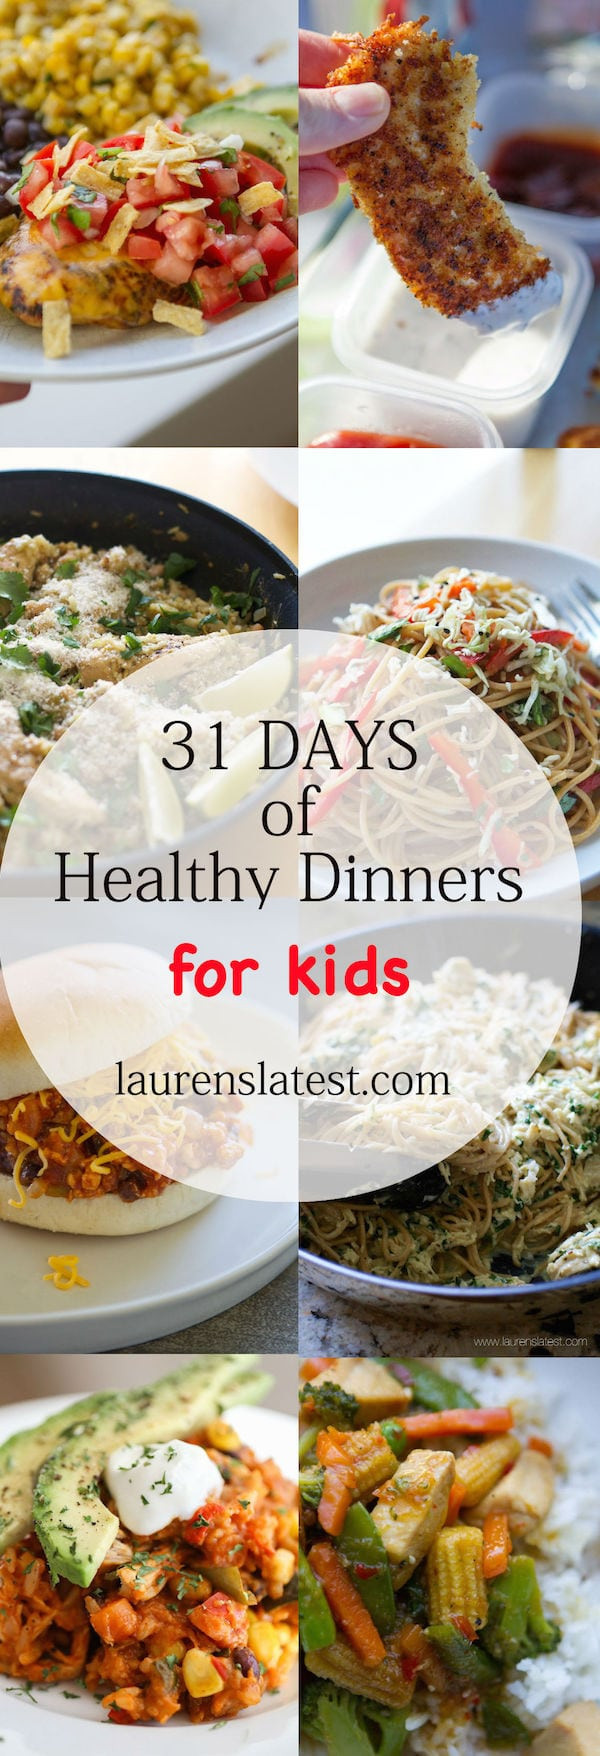 Fun Healthy Dinners For Kids
 Healthy Dinner Ideas for e Month